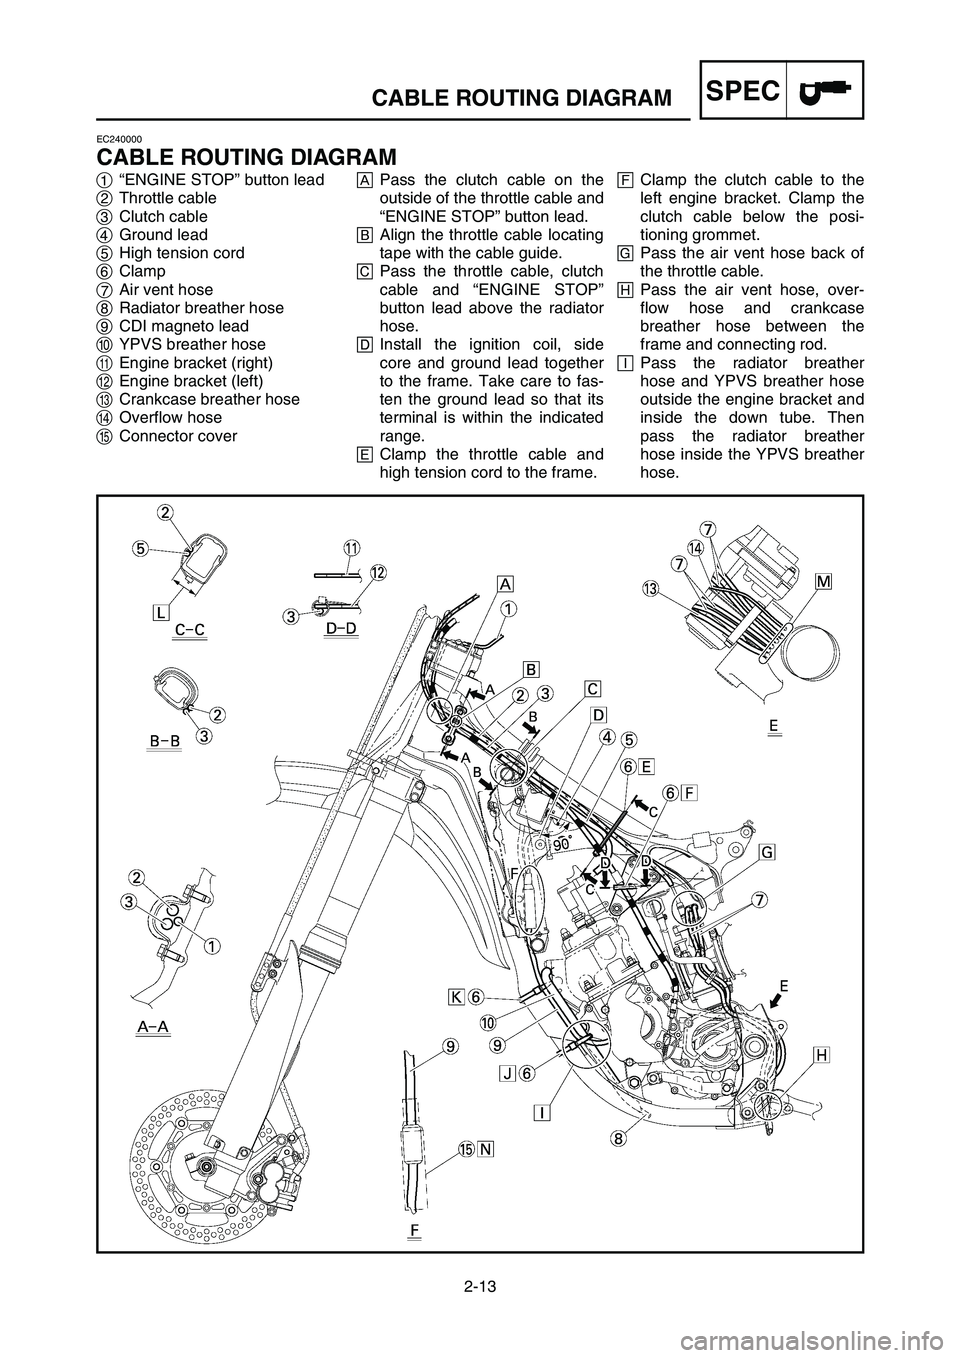 YAMAHA YZ125LC 2006  Notices Demploi (in French) 2-13
SPECCABLE ROUTING DIAGRAM
EC240000
CABLE ROUTING DIAGRAM
1“ENGINE STOP” button lead
2Throttle cable
3Clutch cable
4Ground lead
5High tension cord
6Clamp
7Air vent hose
8Radiator breather hose